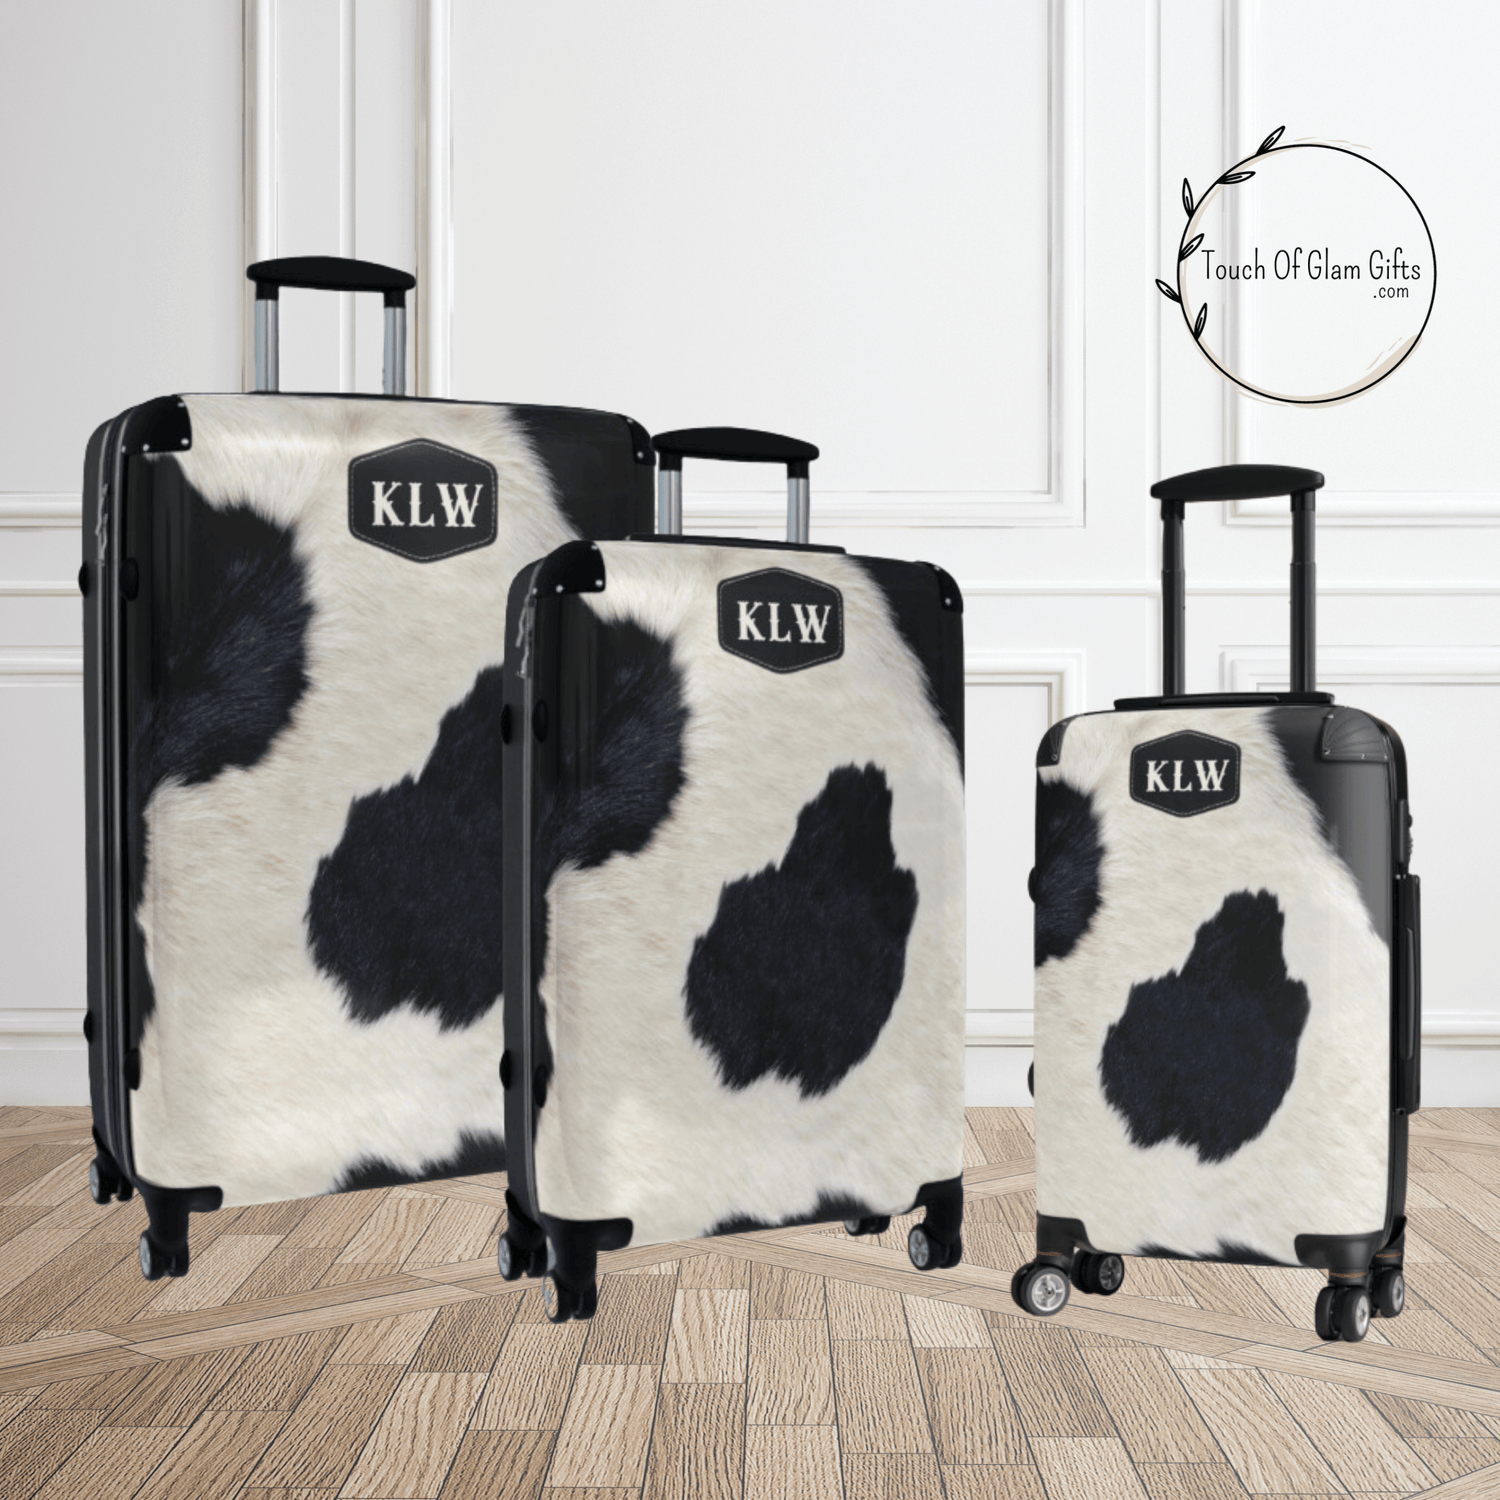 Our black and white cowhide luggage set. Personalized western luggage for the cowgirl.